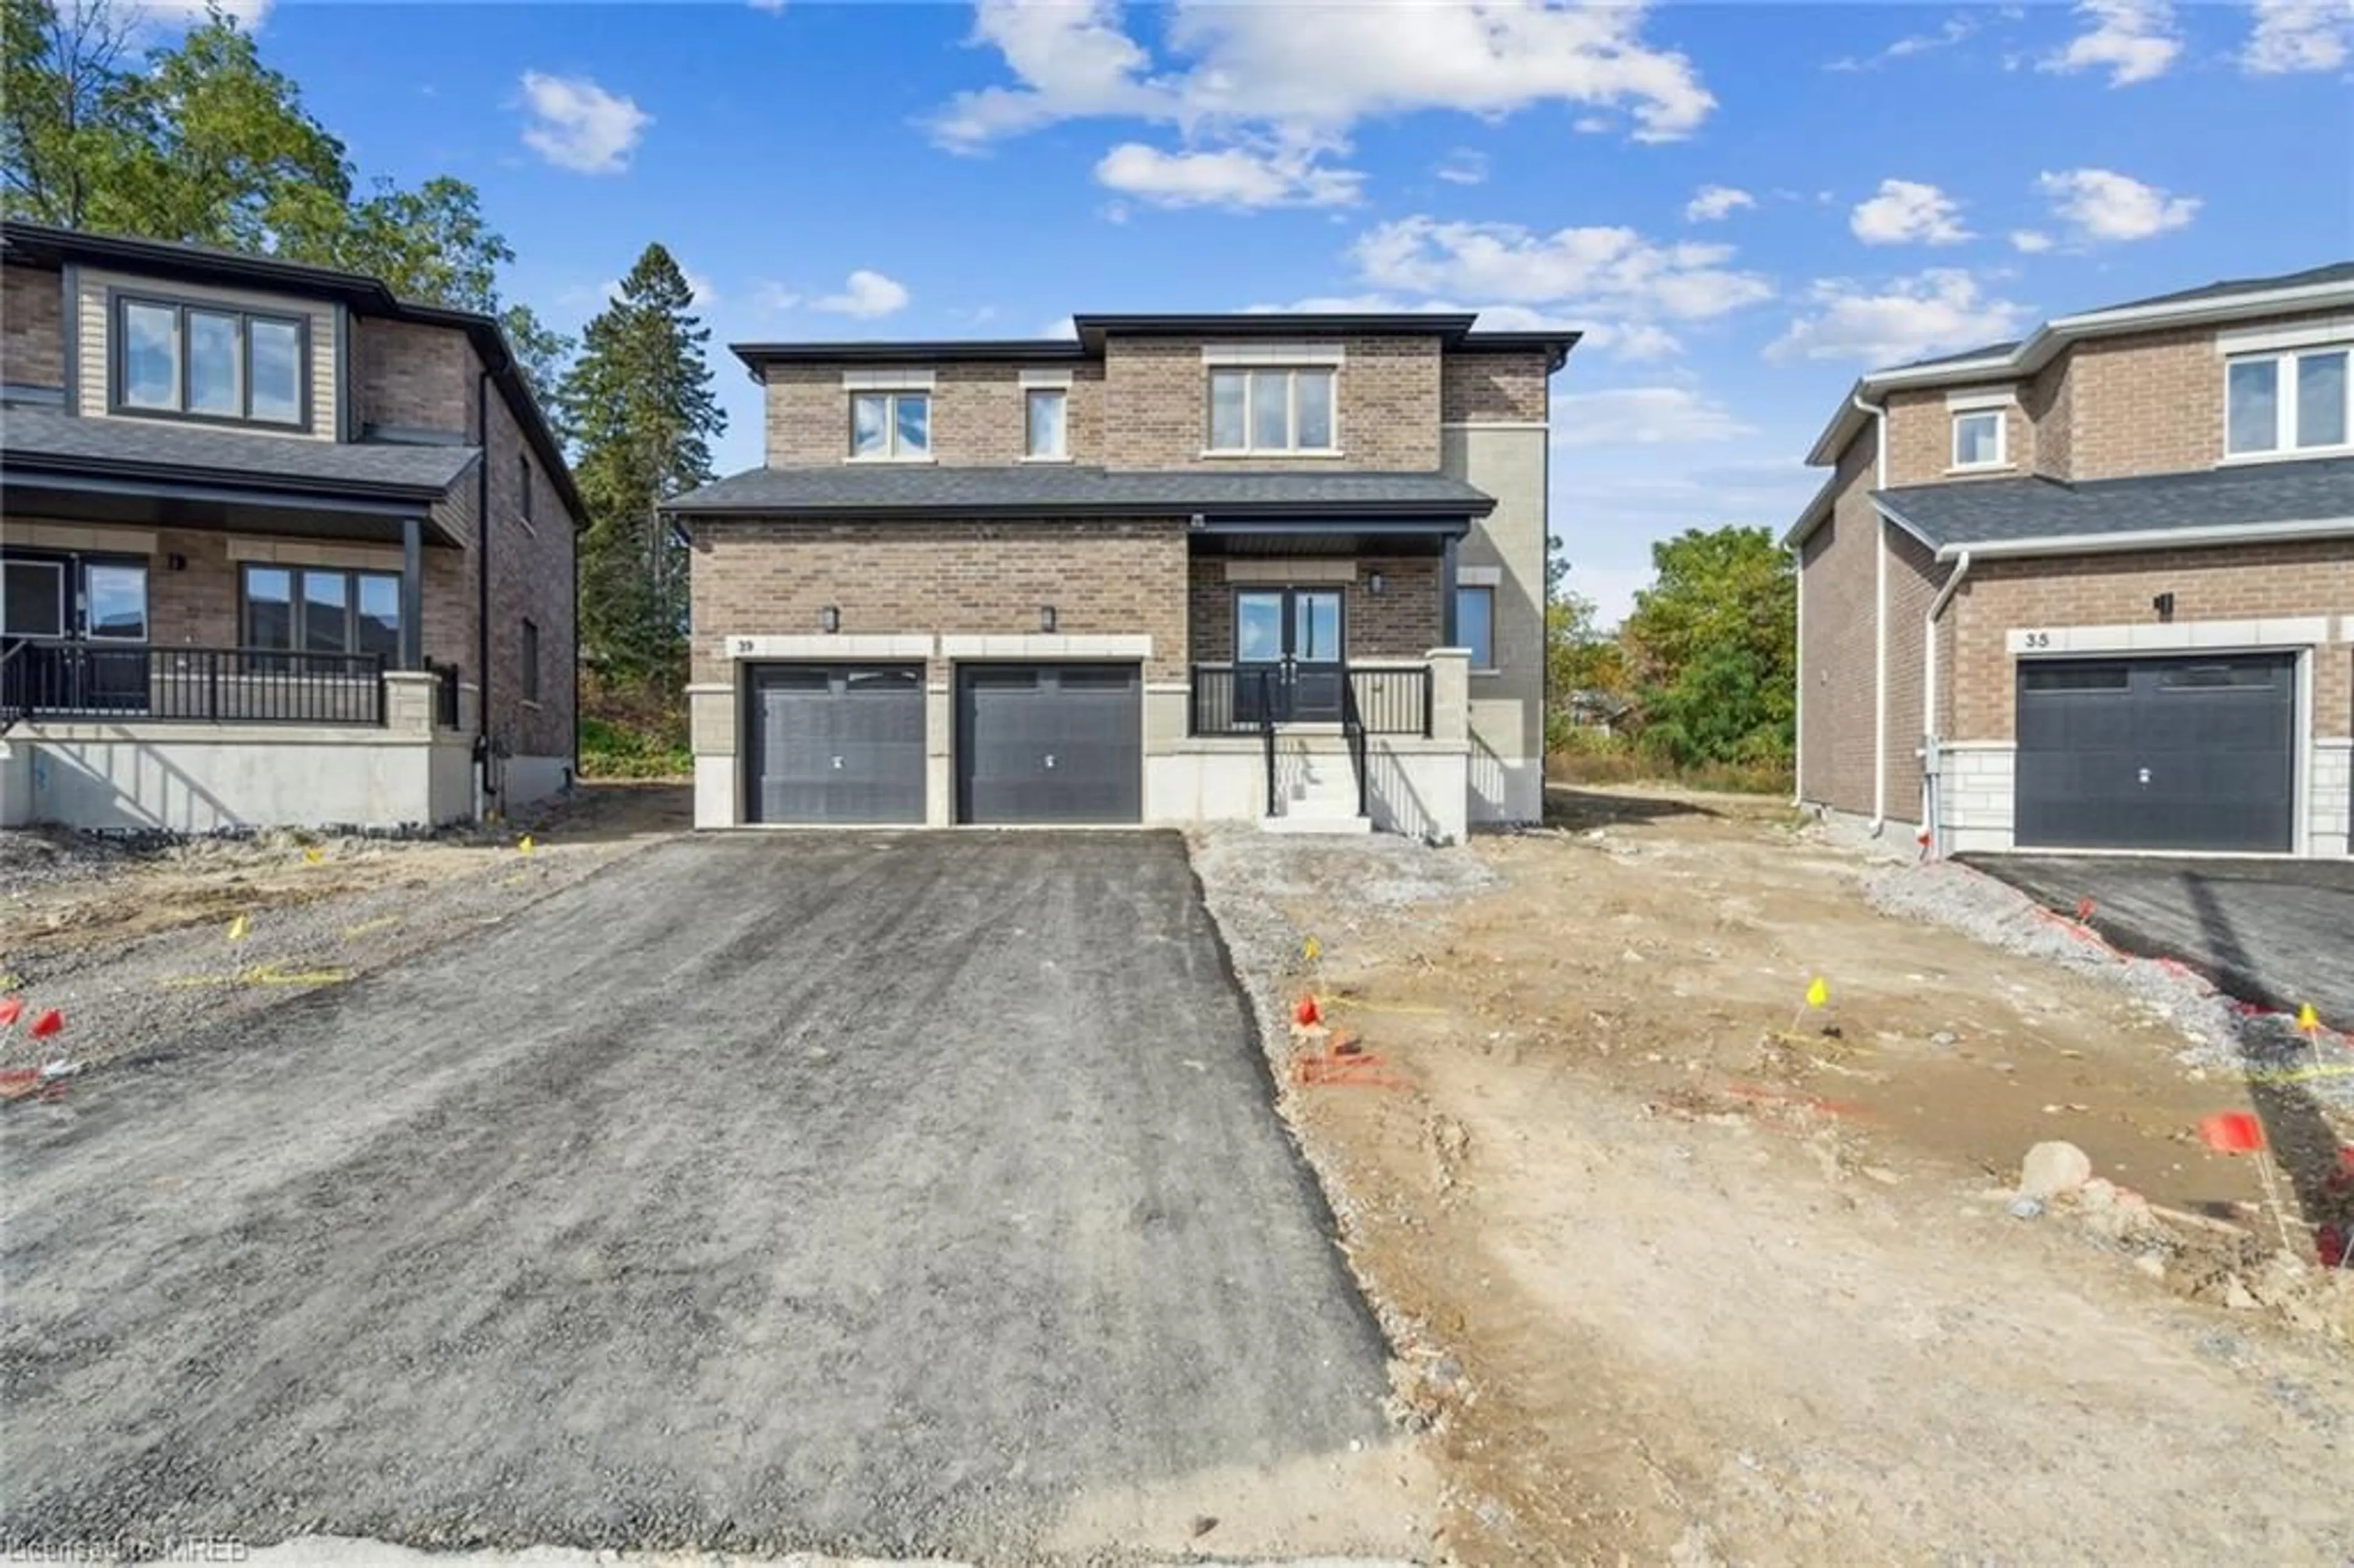 Home with brick exterior material for 39 Tulip Cres, Simcoe Ontario N3Y 0G8